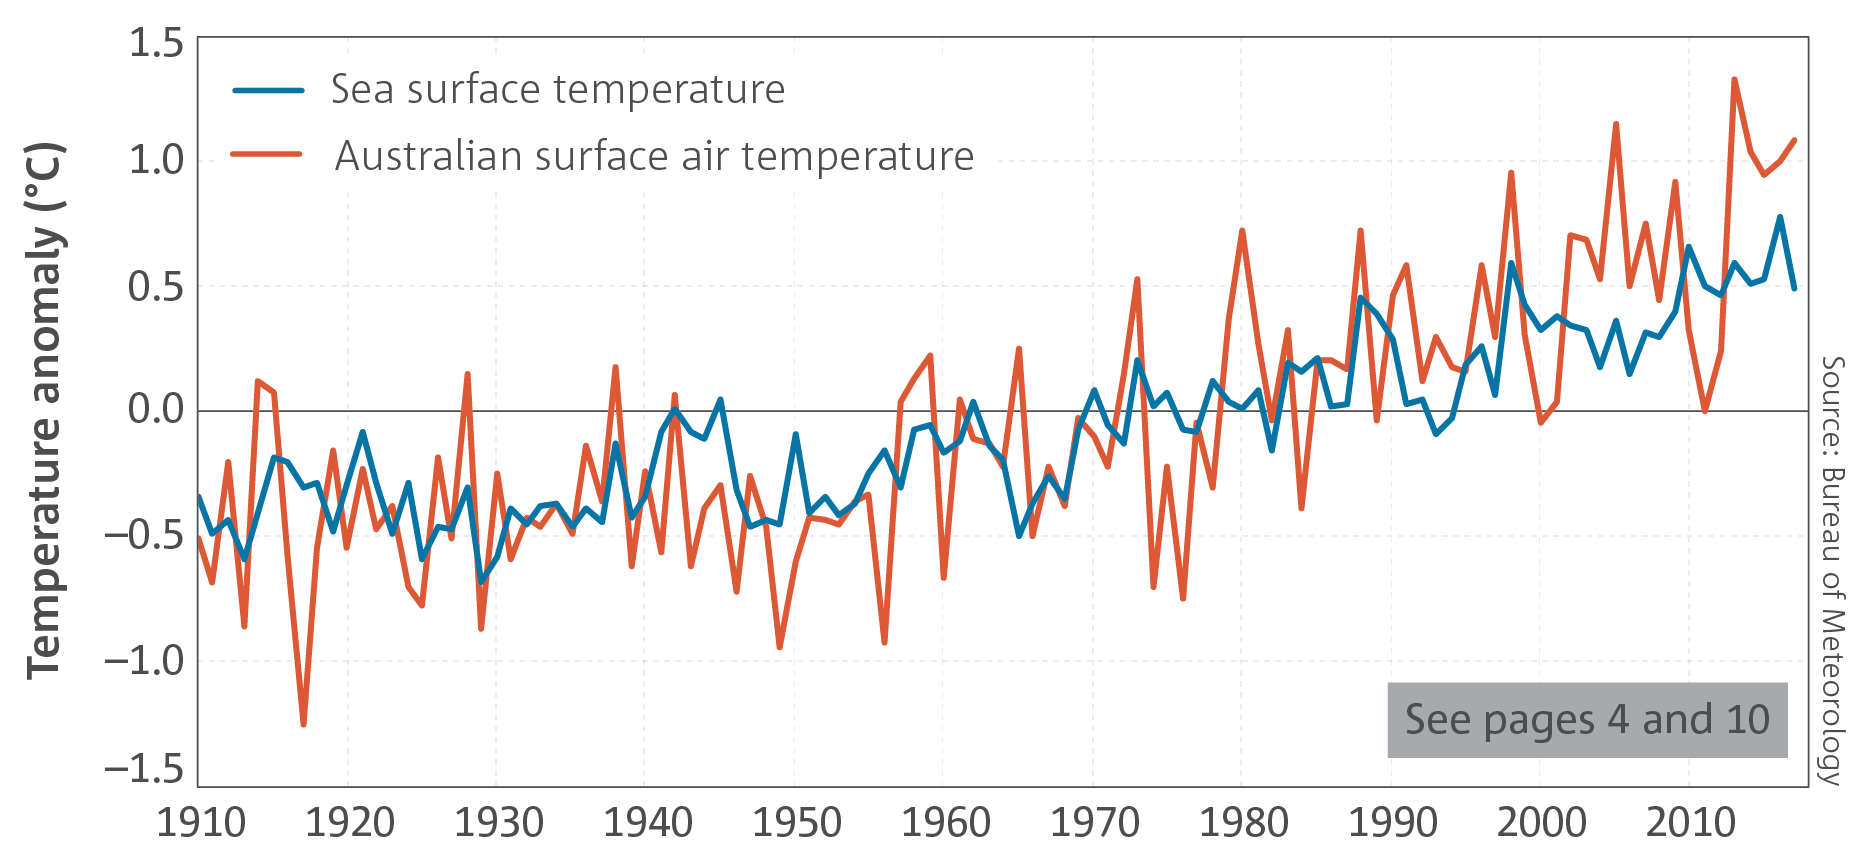 A graph comparing the sea surface temperature and the Australian surface air temperature